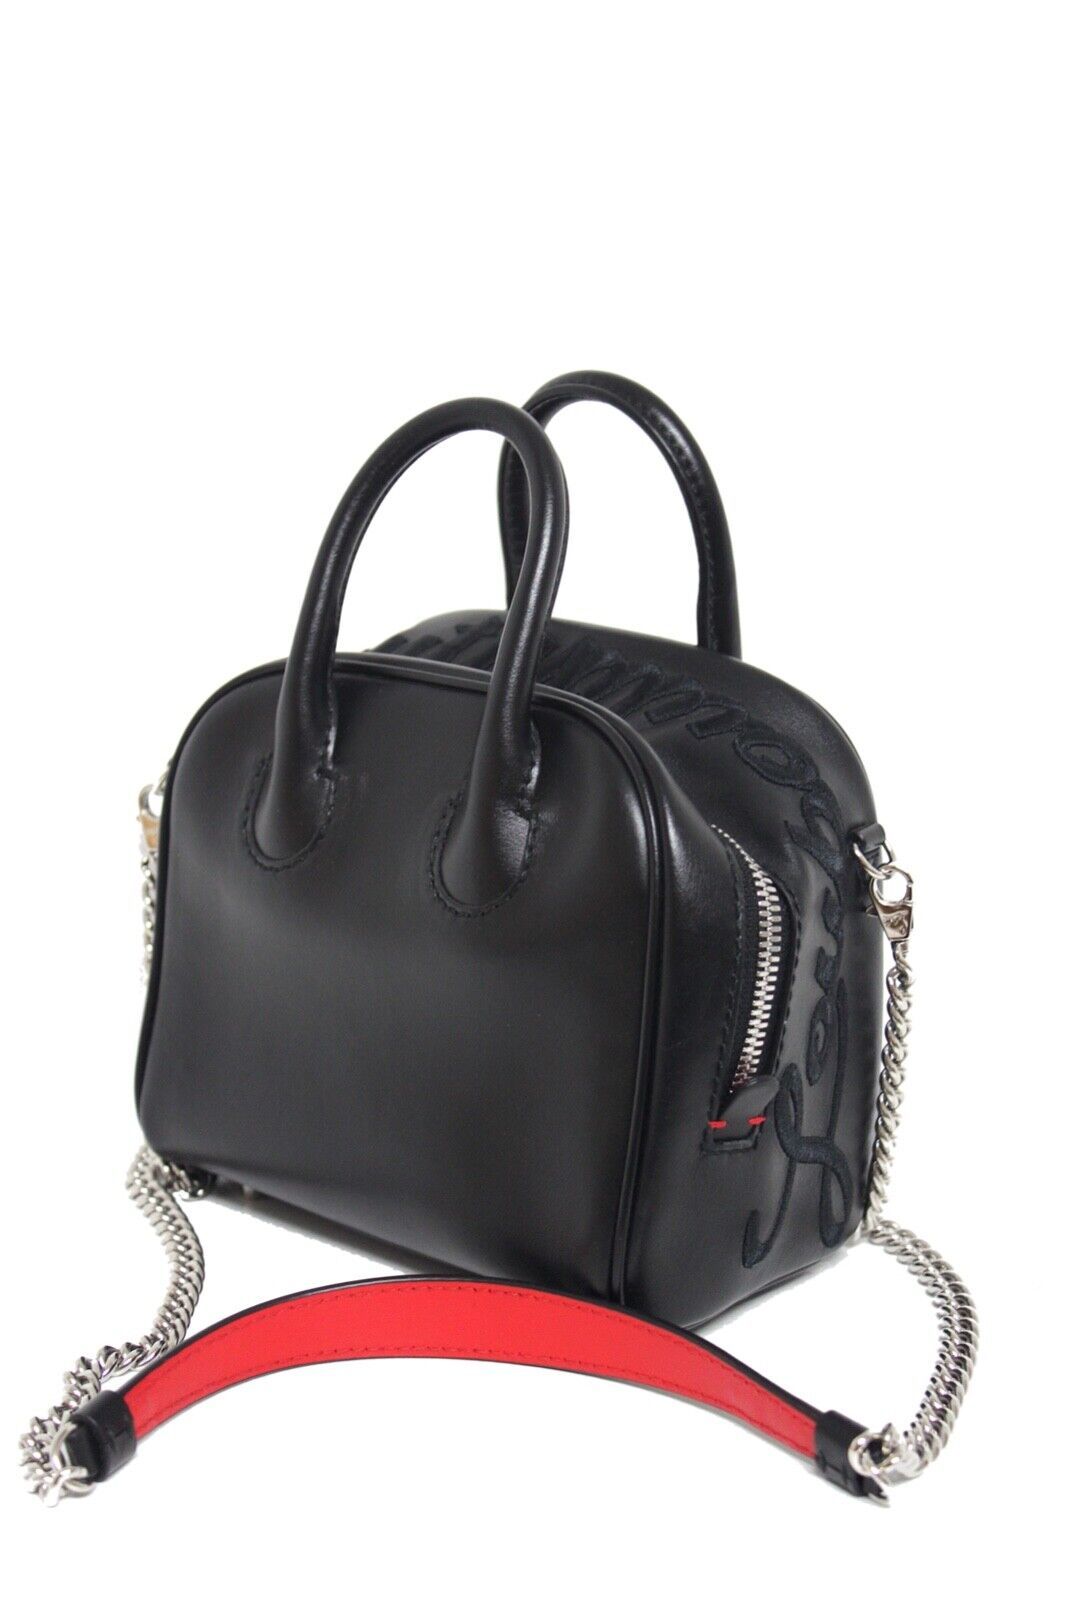 Primary image for New Christian Louboutin Mary Jane Nano Top Handle Black Leather Messenger Bag